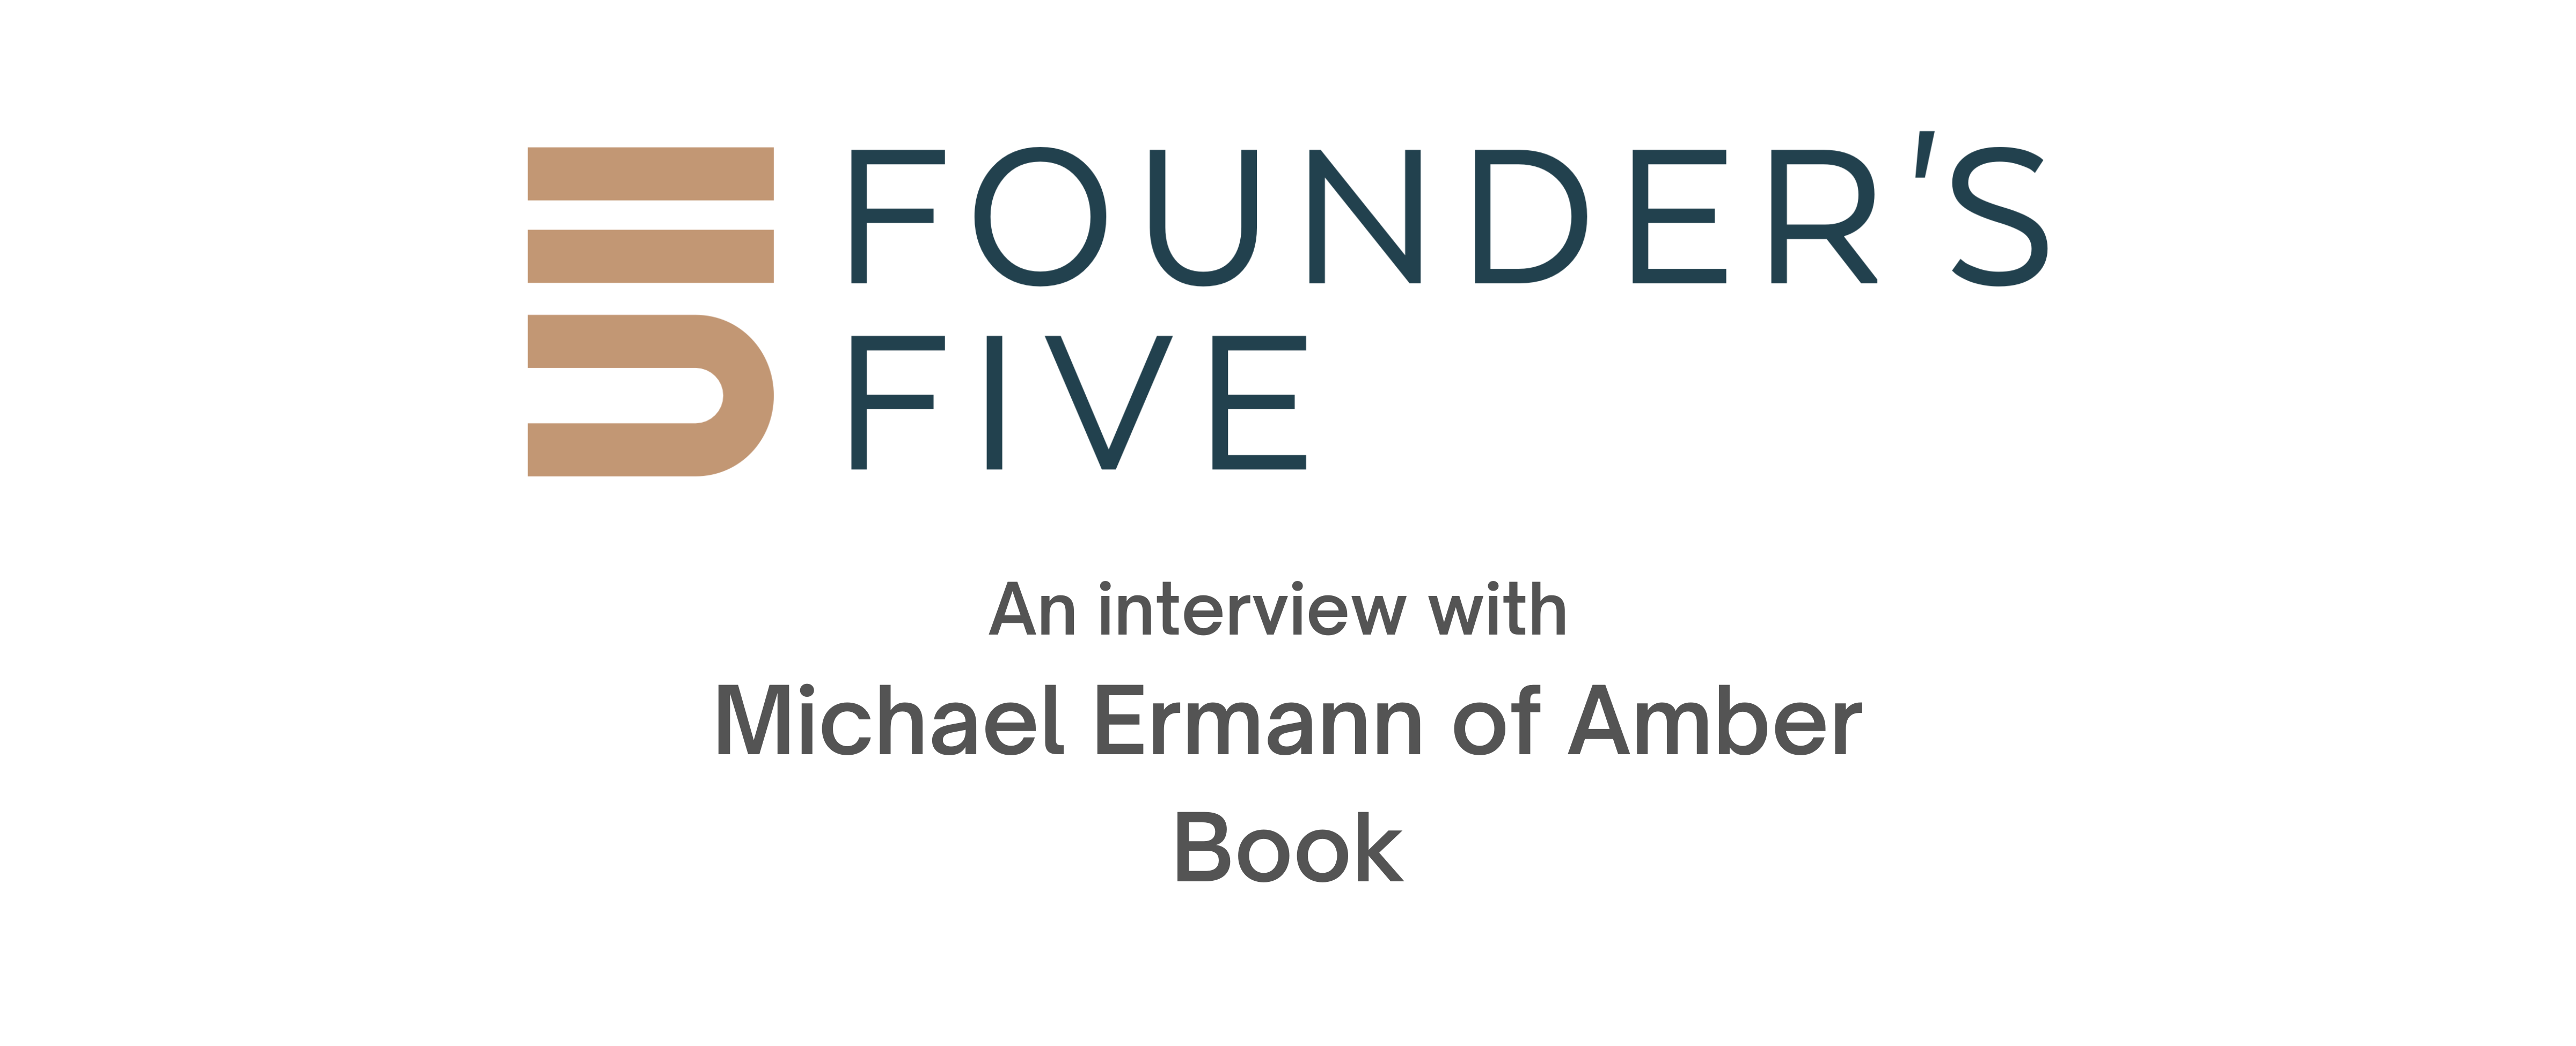 Founder's Five: An interview with Michael Ermann of Amber Book